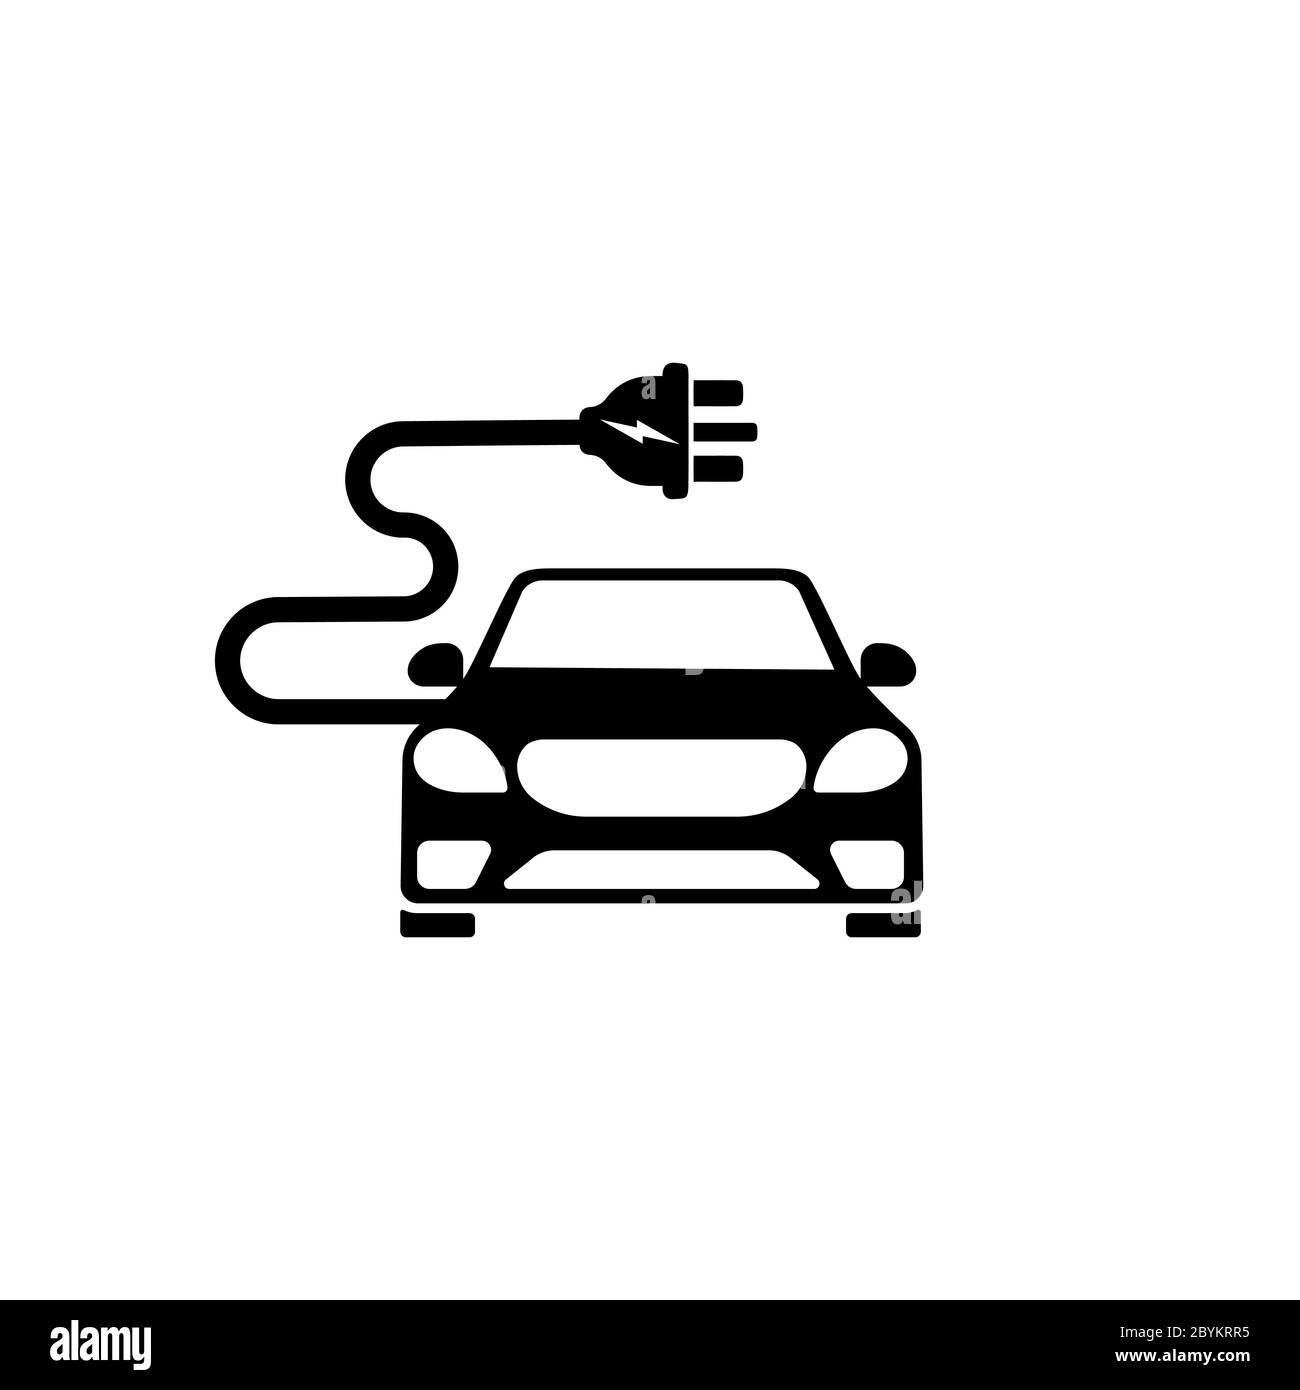 Electric car charging station icon in black on isolated white background. EPS 10 vector. Stock Vector